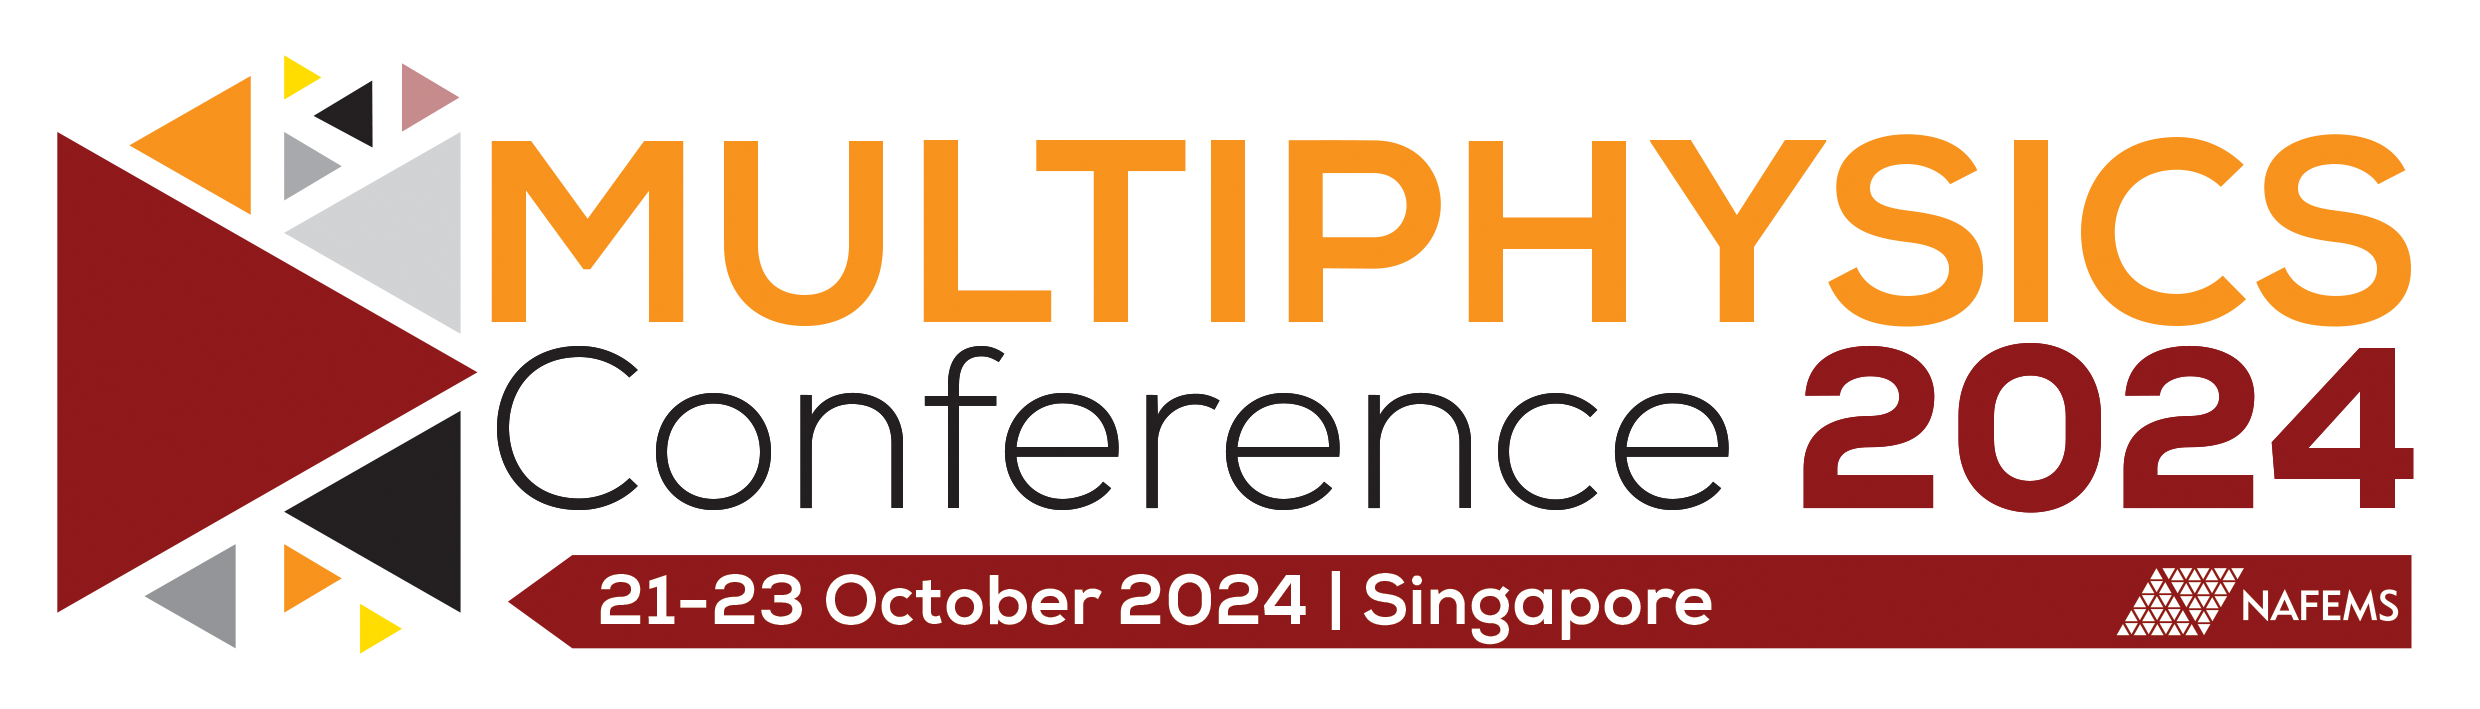 Multiphysics Conference 2024